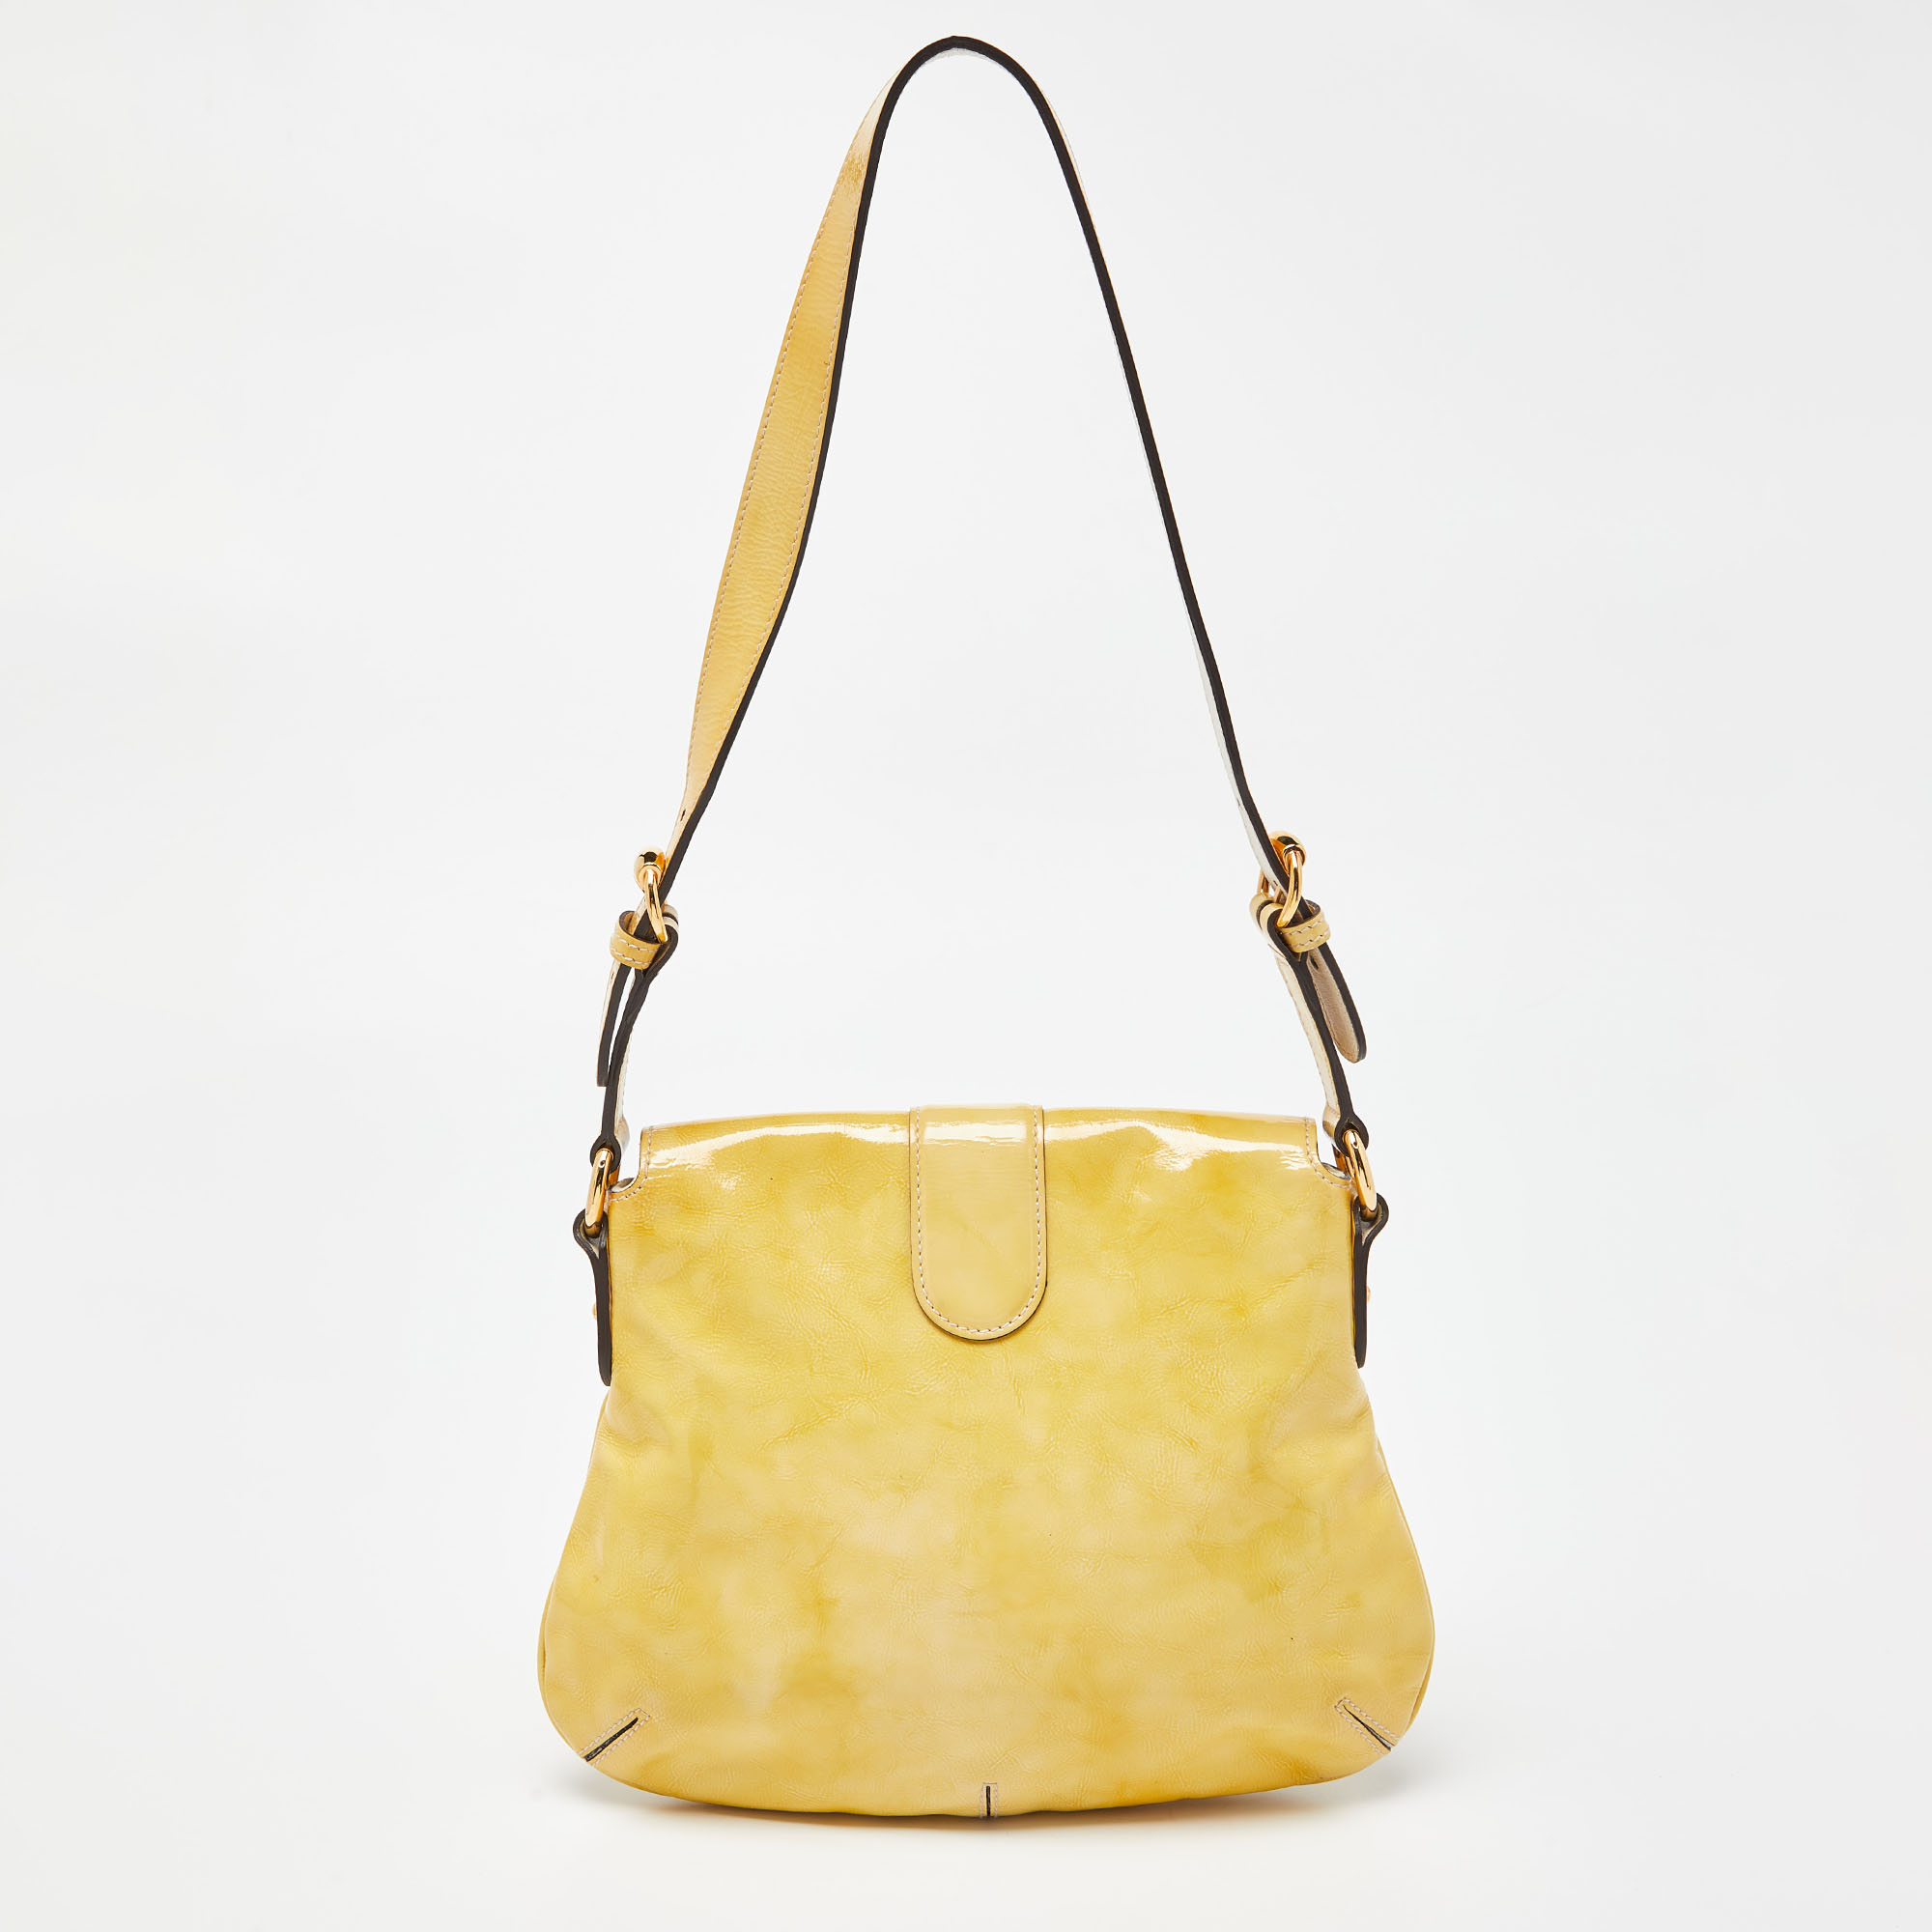 Gucci Yellow Patent Leather Wave Flap Bag